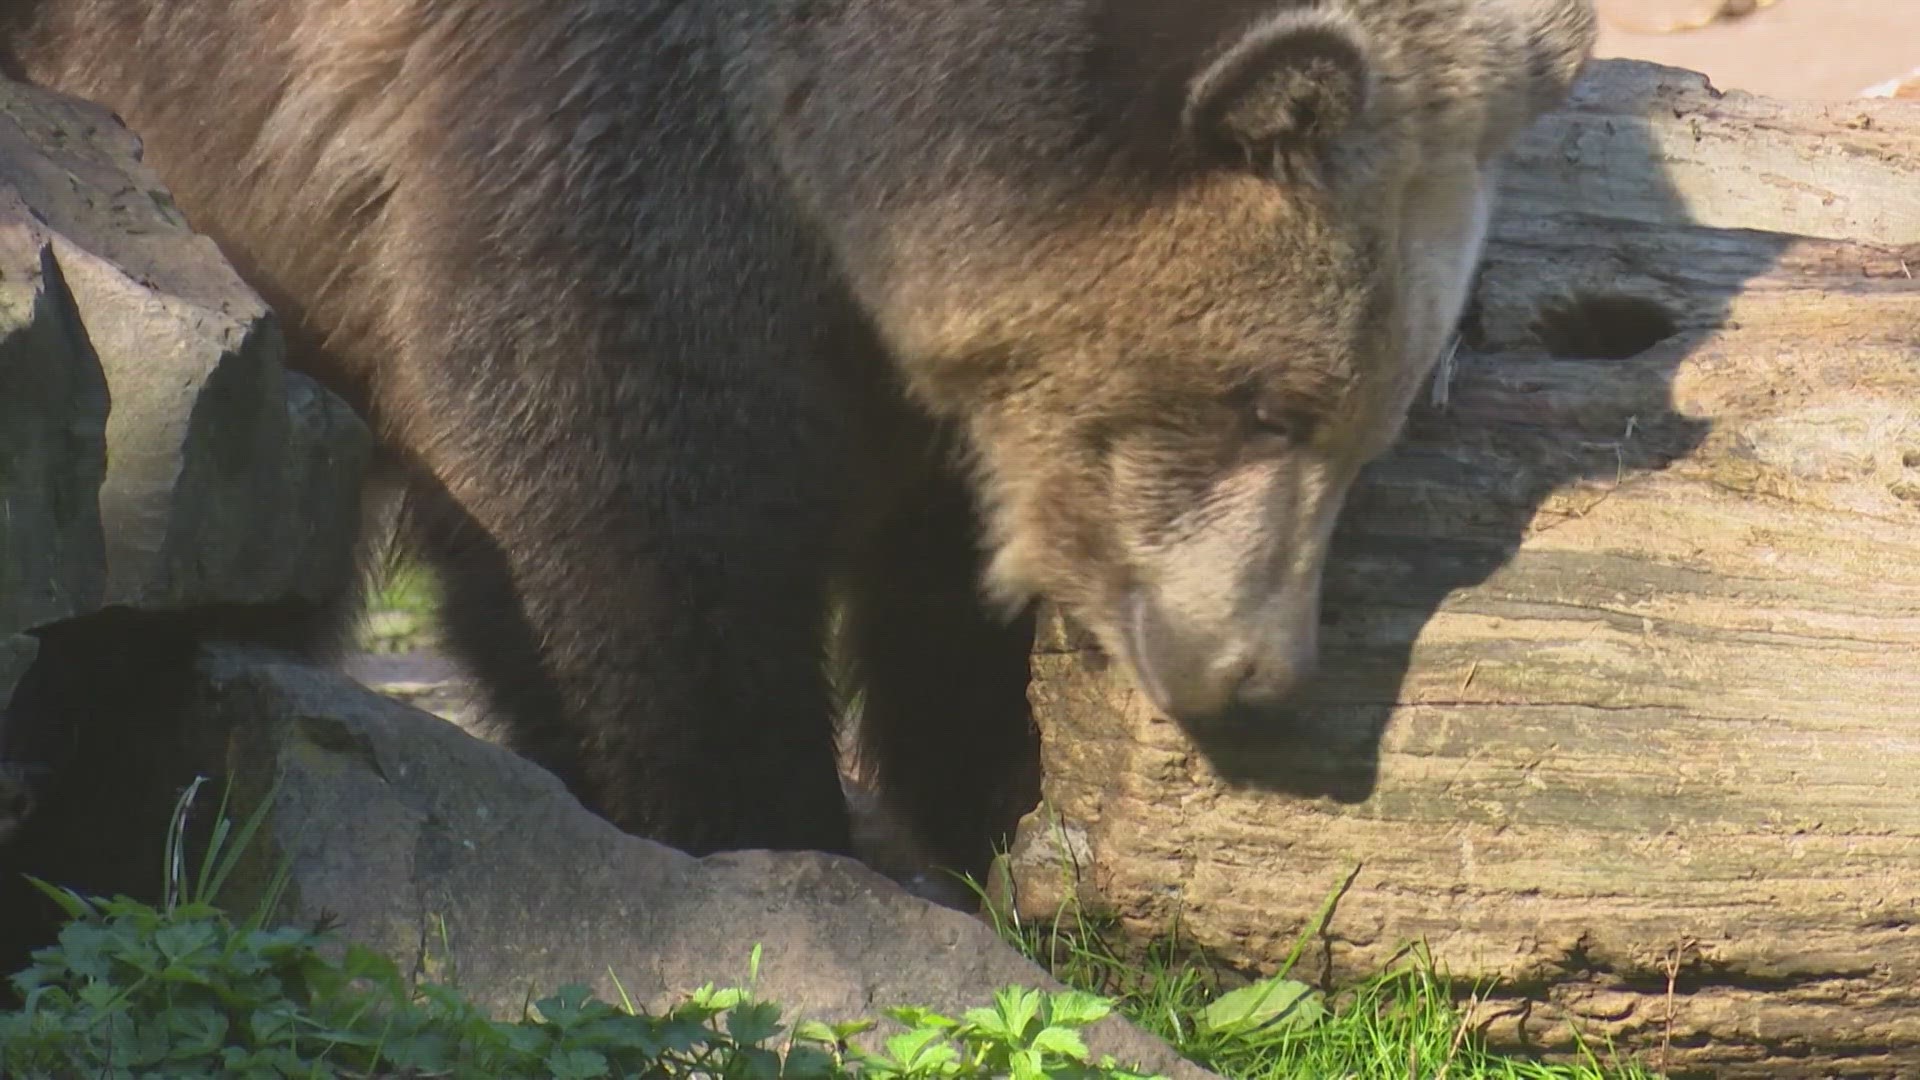 There are three potential plans that Washington could take regarding the future of grizzly bears in the state. However, B.C. leaders are moving forward with plans.